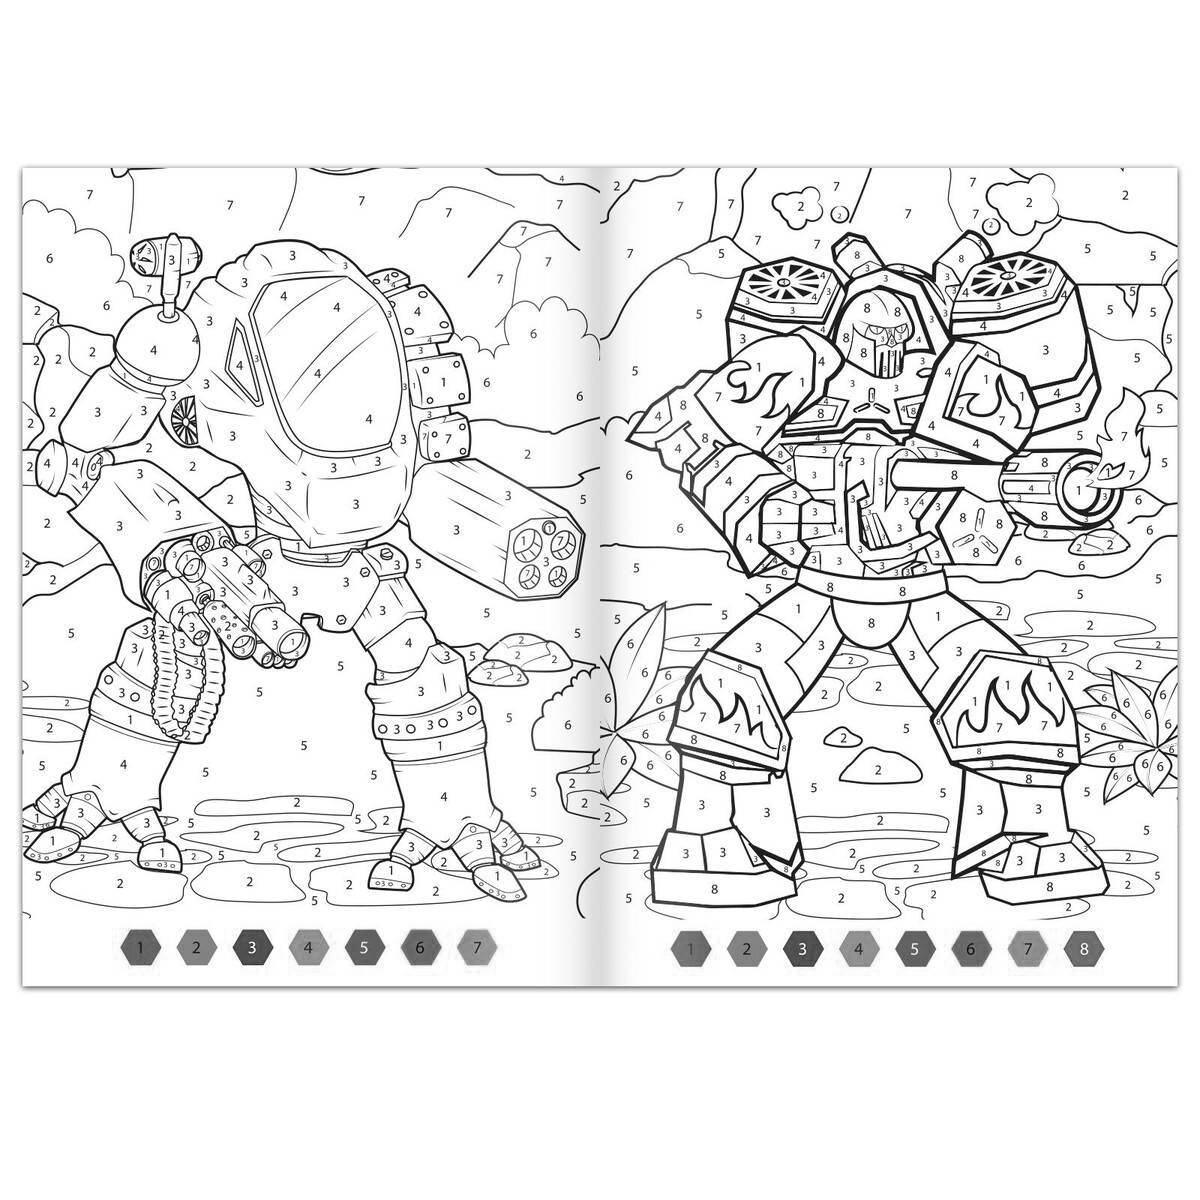 Fun coloring games by numbers